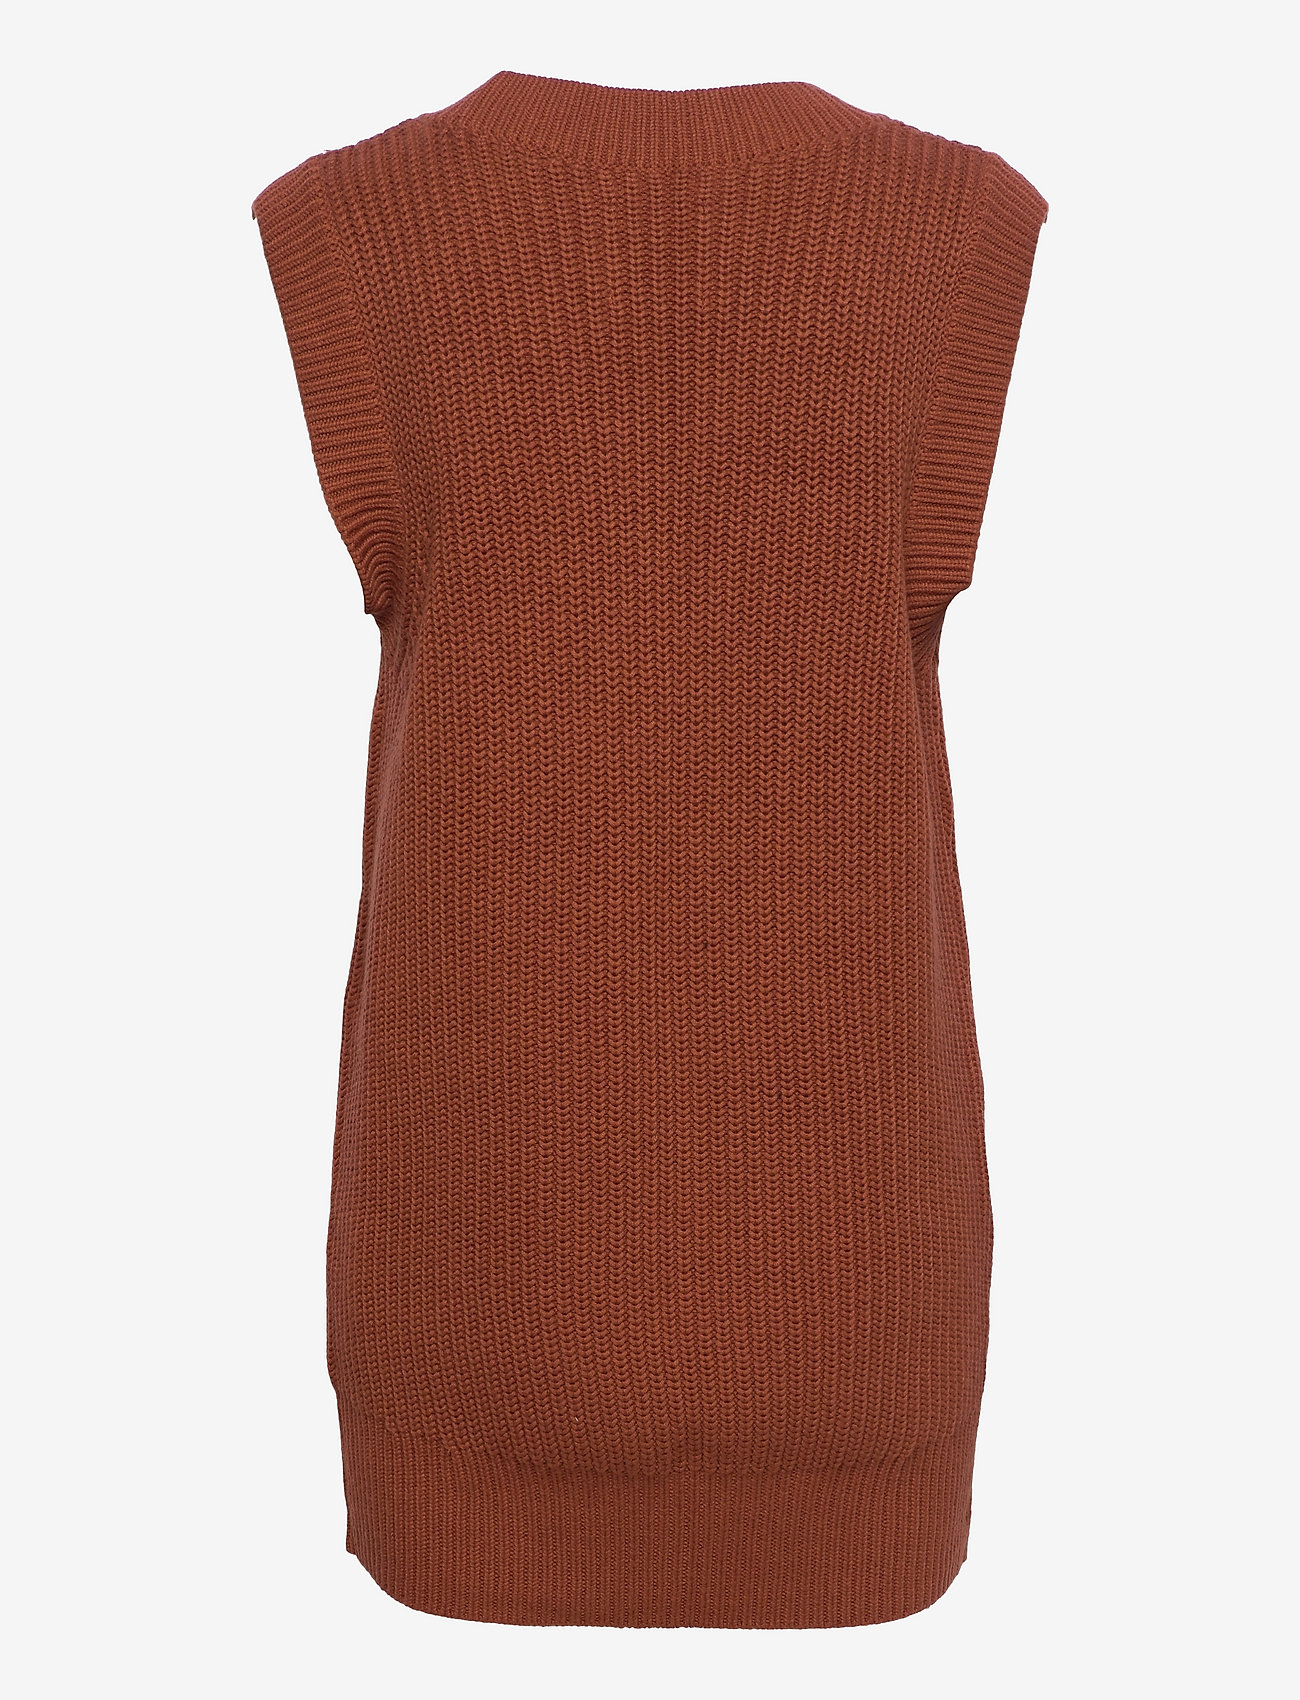 Abercrombie & Fitch - ANF WOMENS DRESSES - knitted vests - brown - 1